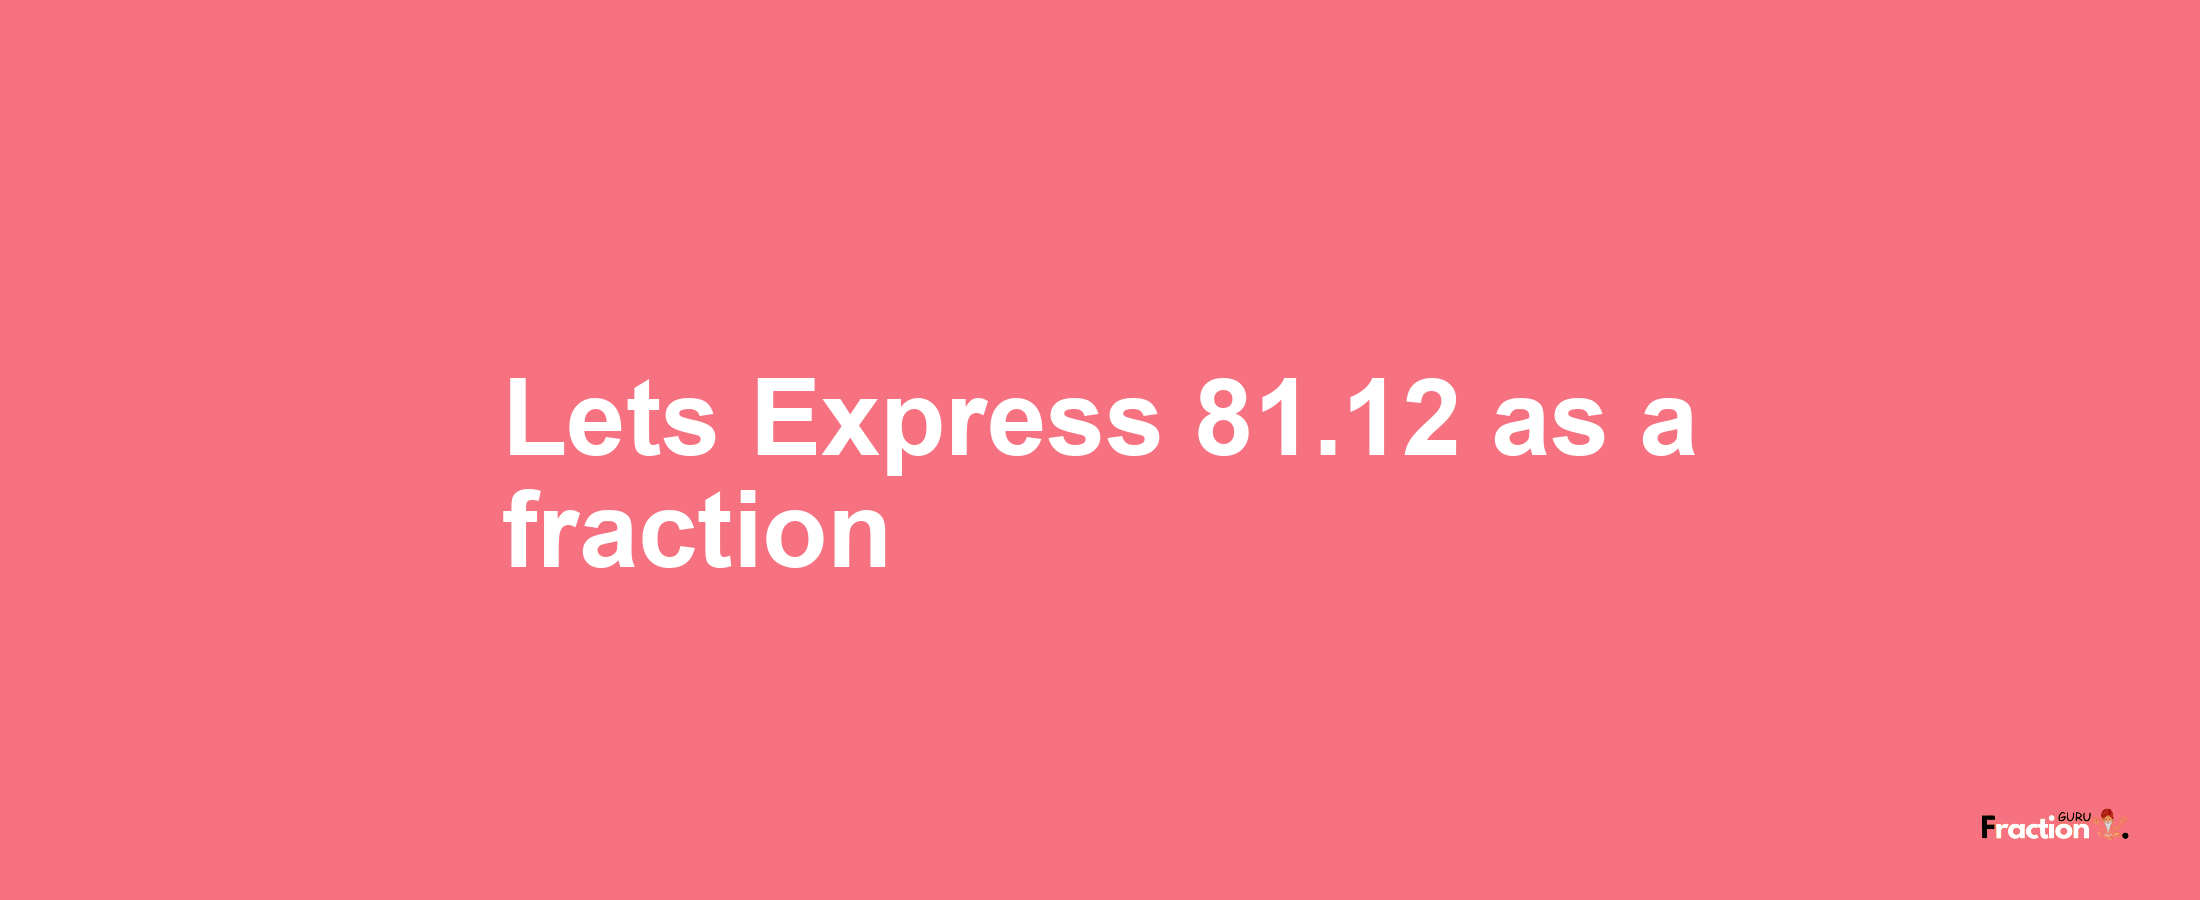 Lets Express 81.12 as afraction